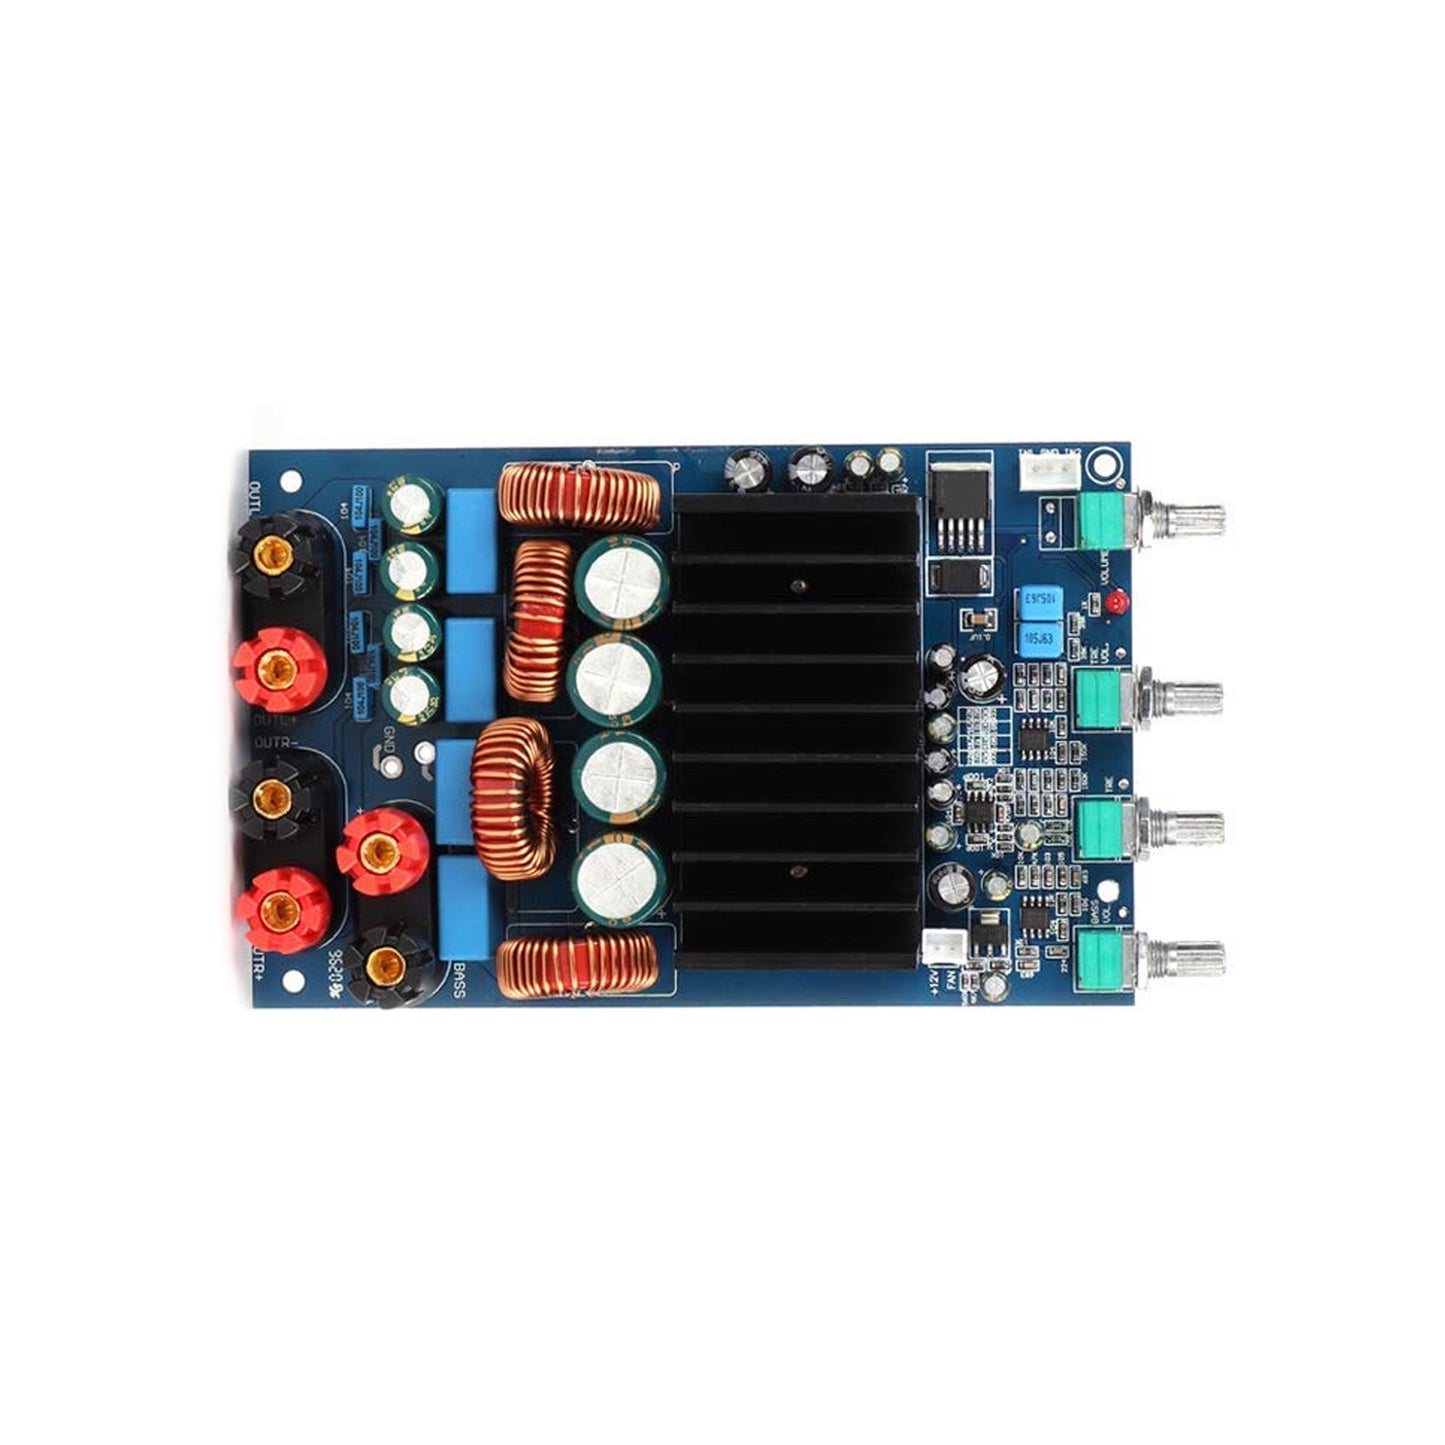 TAS5630 2.1 Digital Power Amplifier Board 300W+150W+150W HD Sound Audio Parts for Electronic Enthusiast - RS2755 - REES52